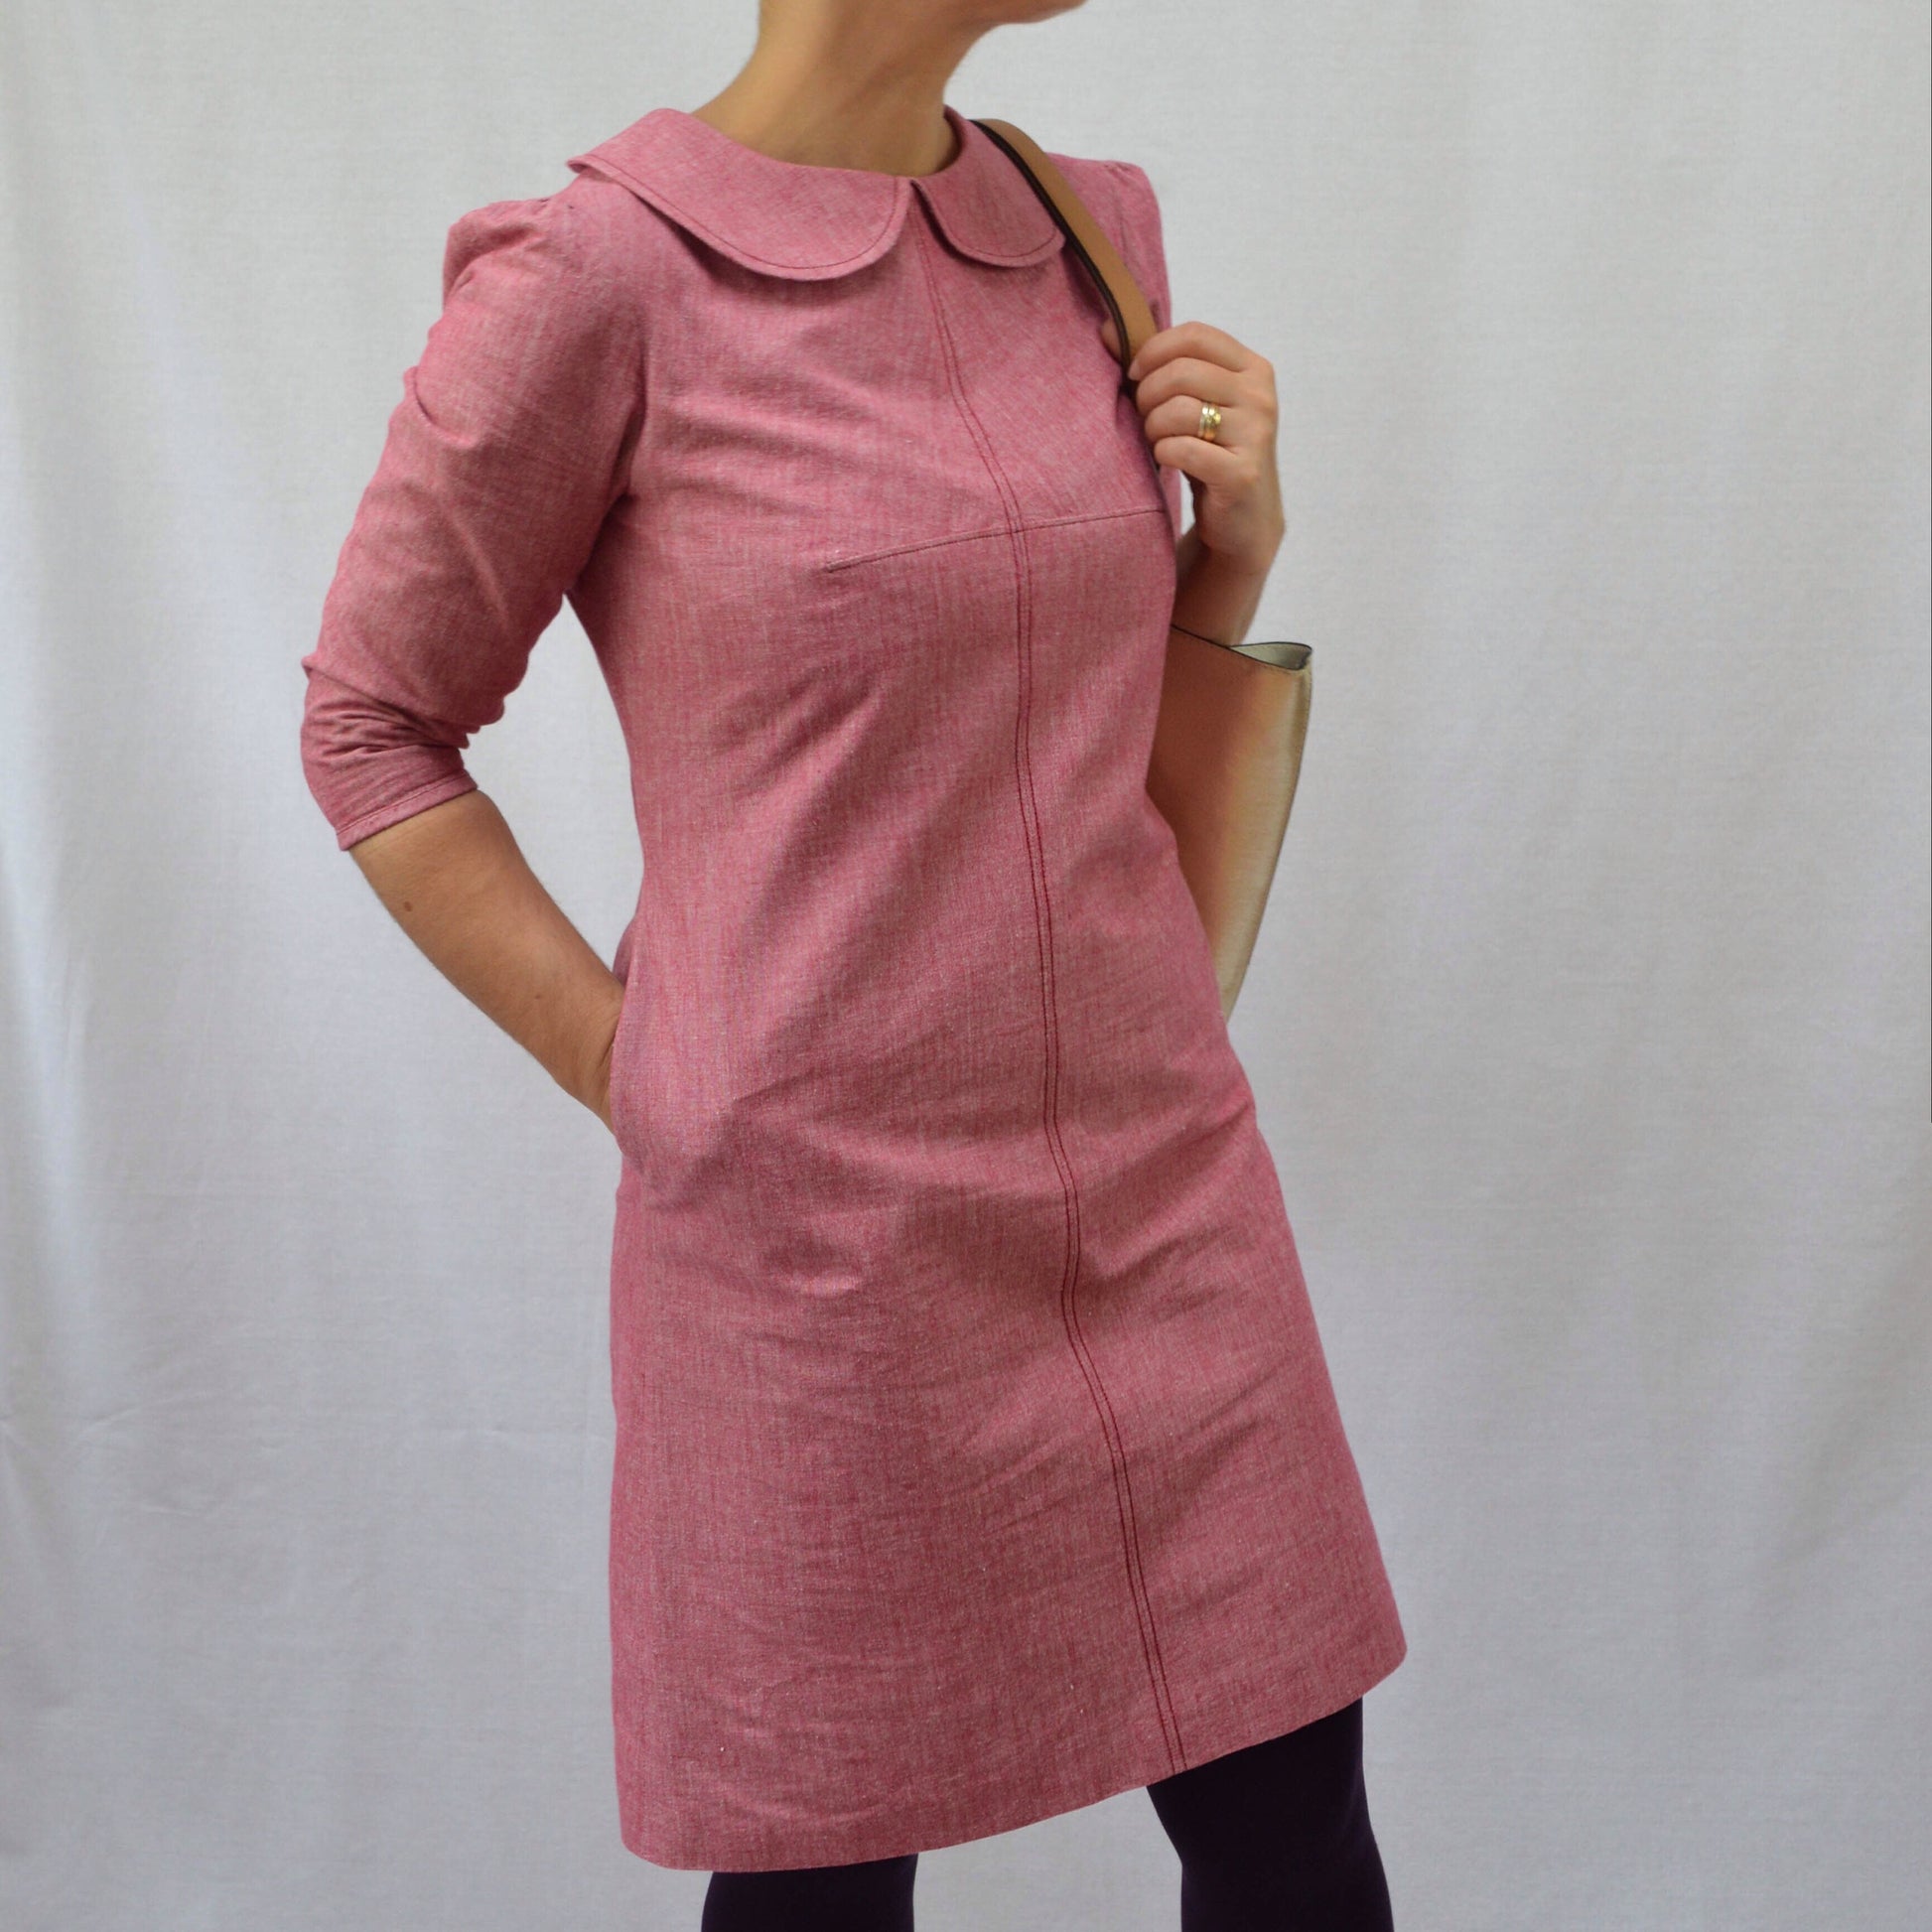 The Kitty Dress sewing pattern with a peter pan collar and long sleeve. Indie sewing patterns, contemporary and modern sewing patterns made in the UK.